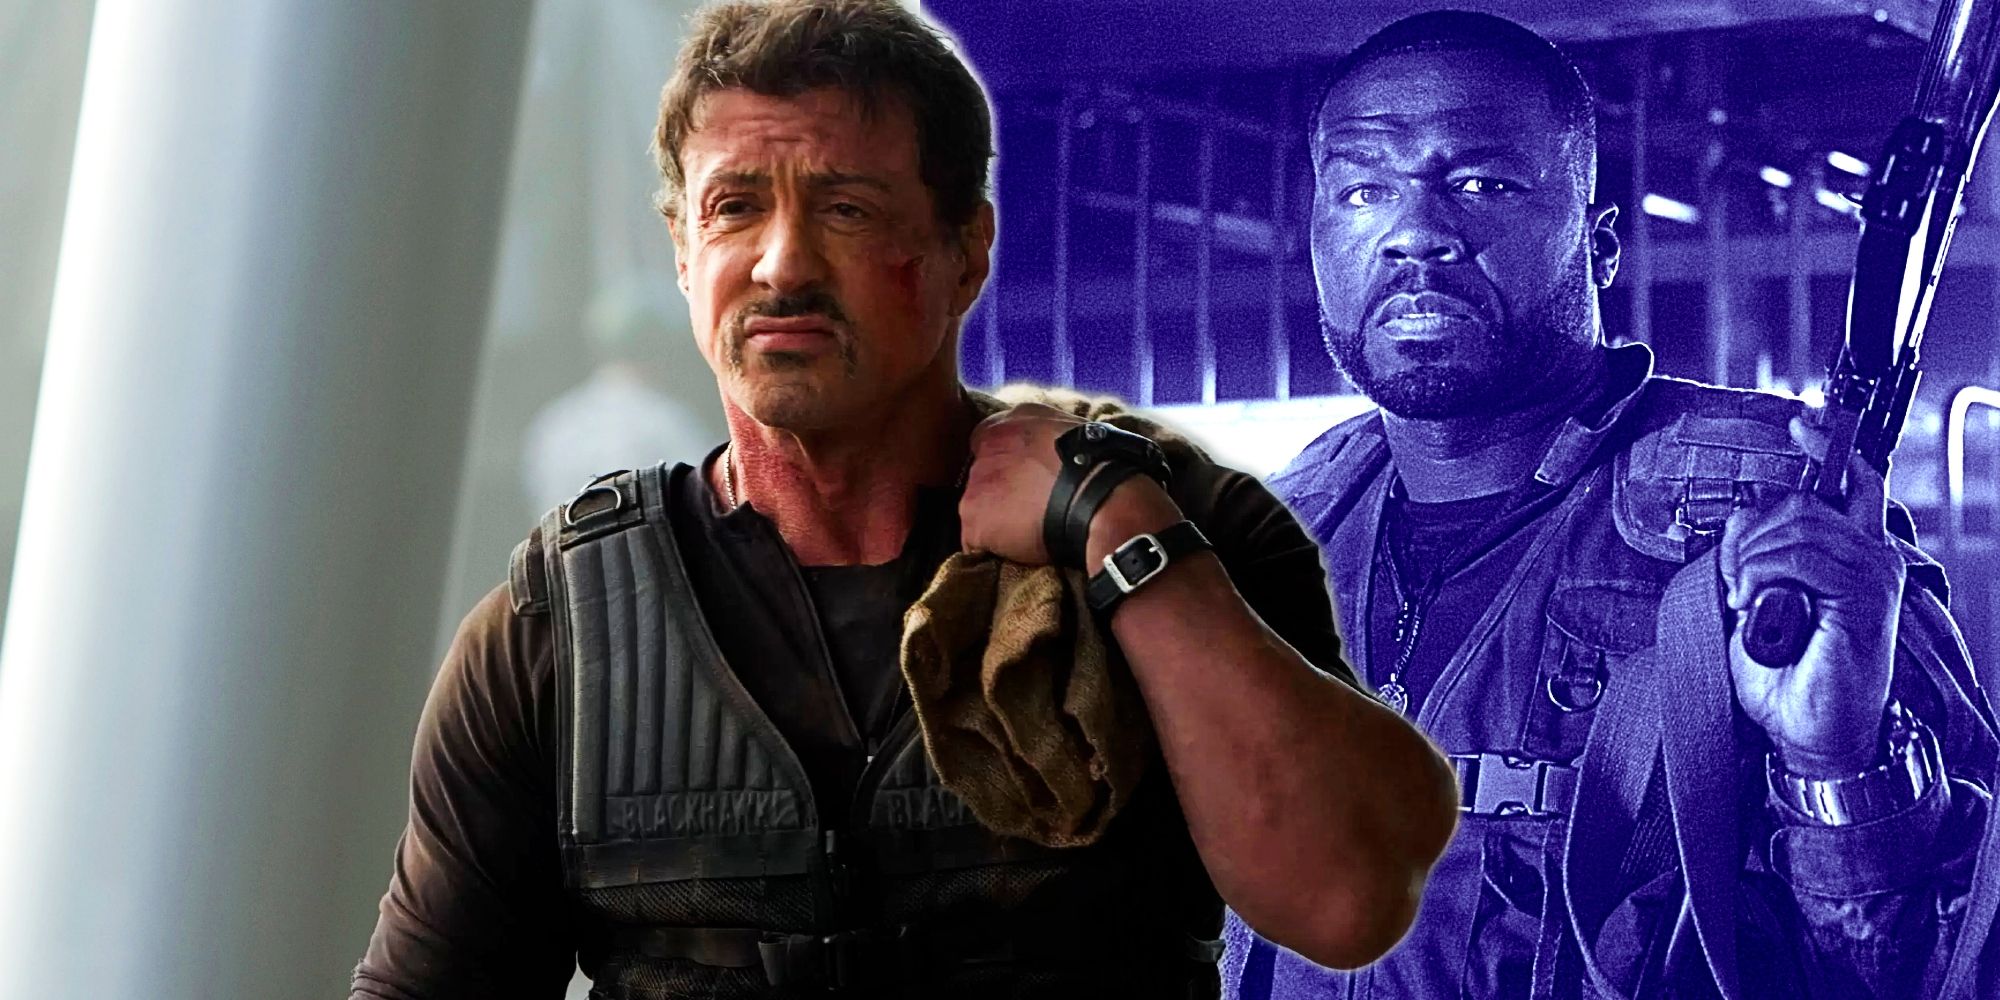 Expendables 4 Will Break The Movies’ Action Icon Obsession (& That’s Good)